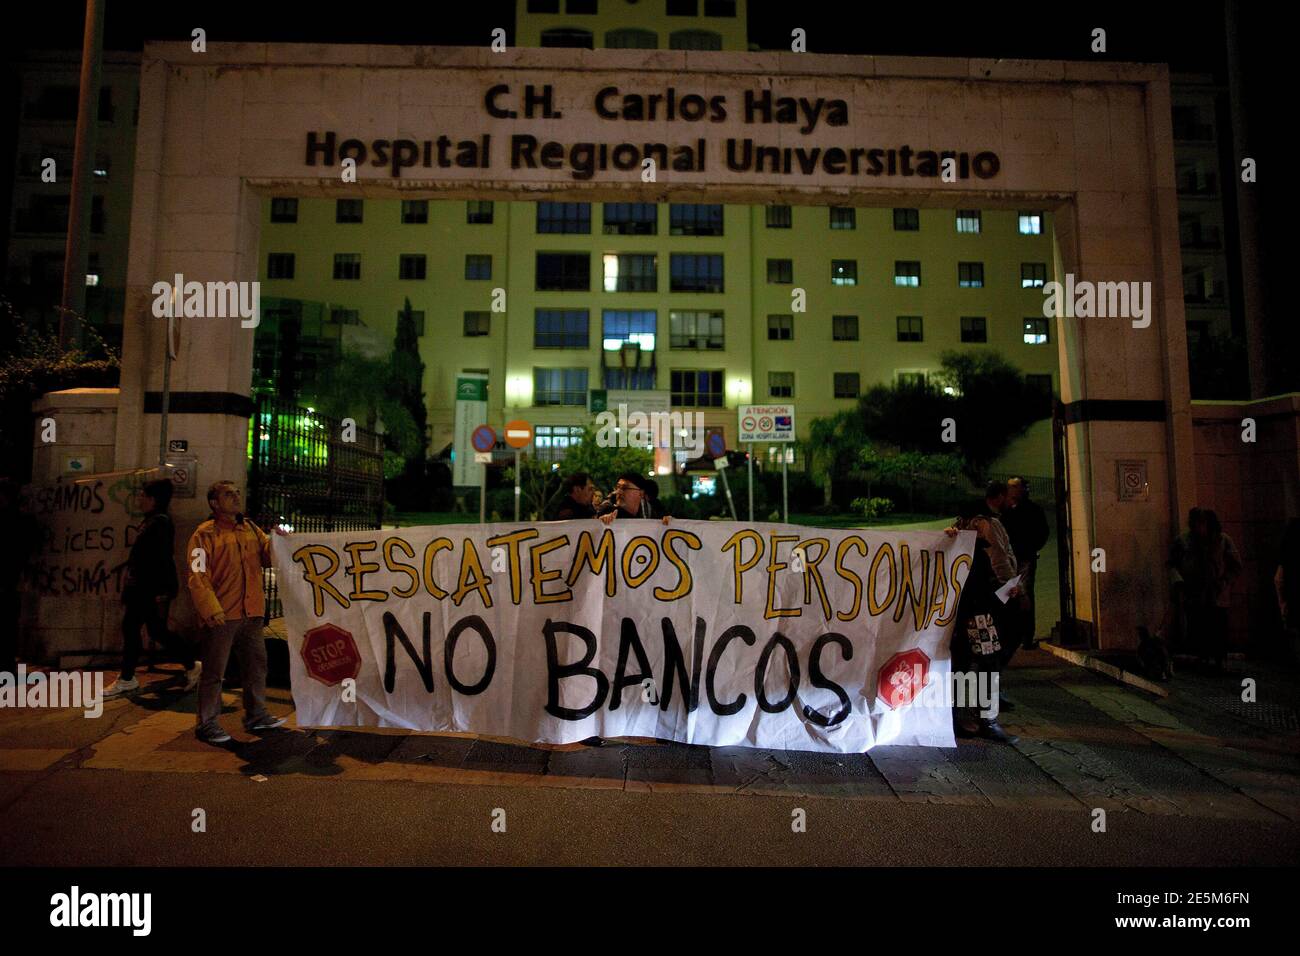 People hold a banner in front of the Carlos Haya hospital during a  demonstration march after two men set themselves on fire, in Malaga,  southern Spain January 4, 2013. Two men, aged